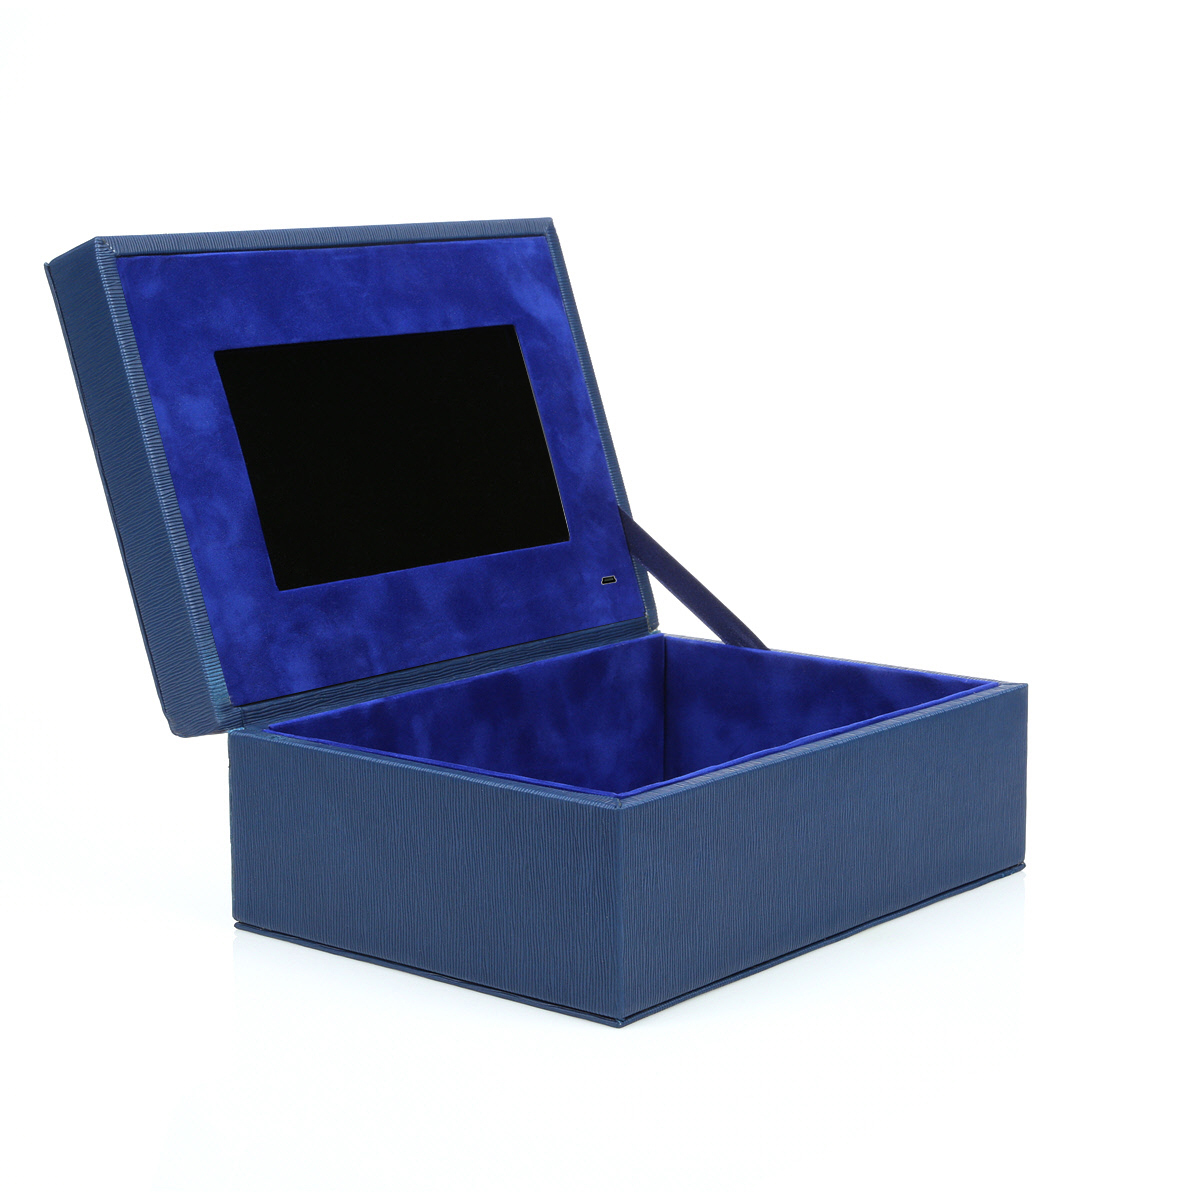 Large Blue Leather Video Box | Spreengs